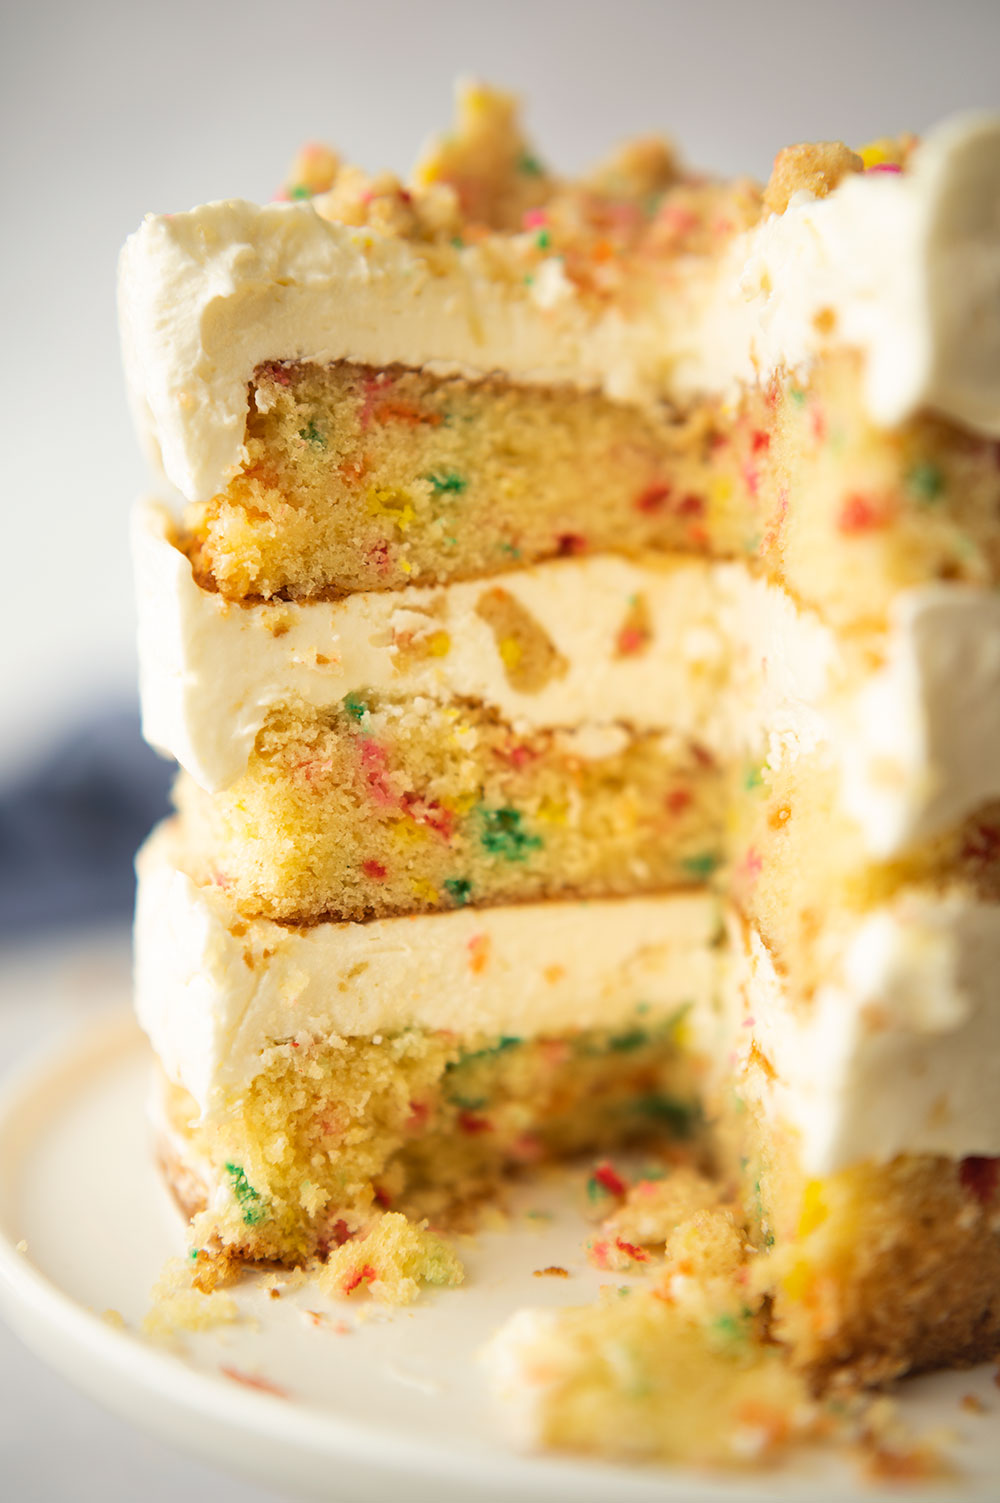 close up view of the sliced layer cake showing the rainbow sprinkle layers and fluffy white frosting.